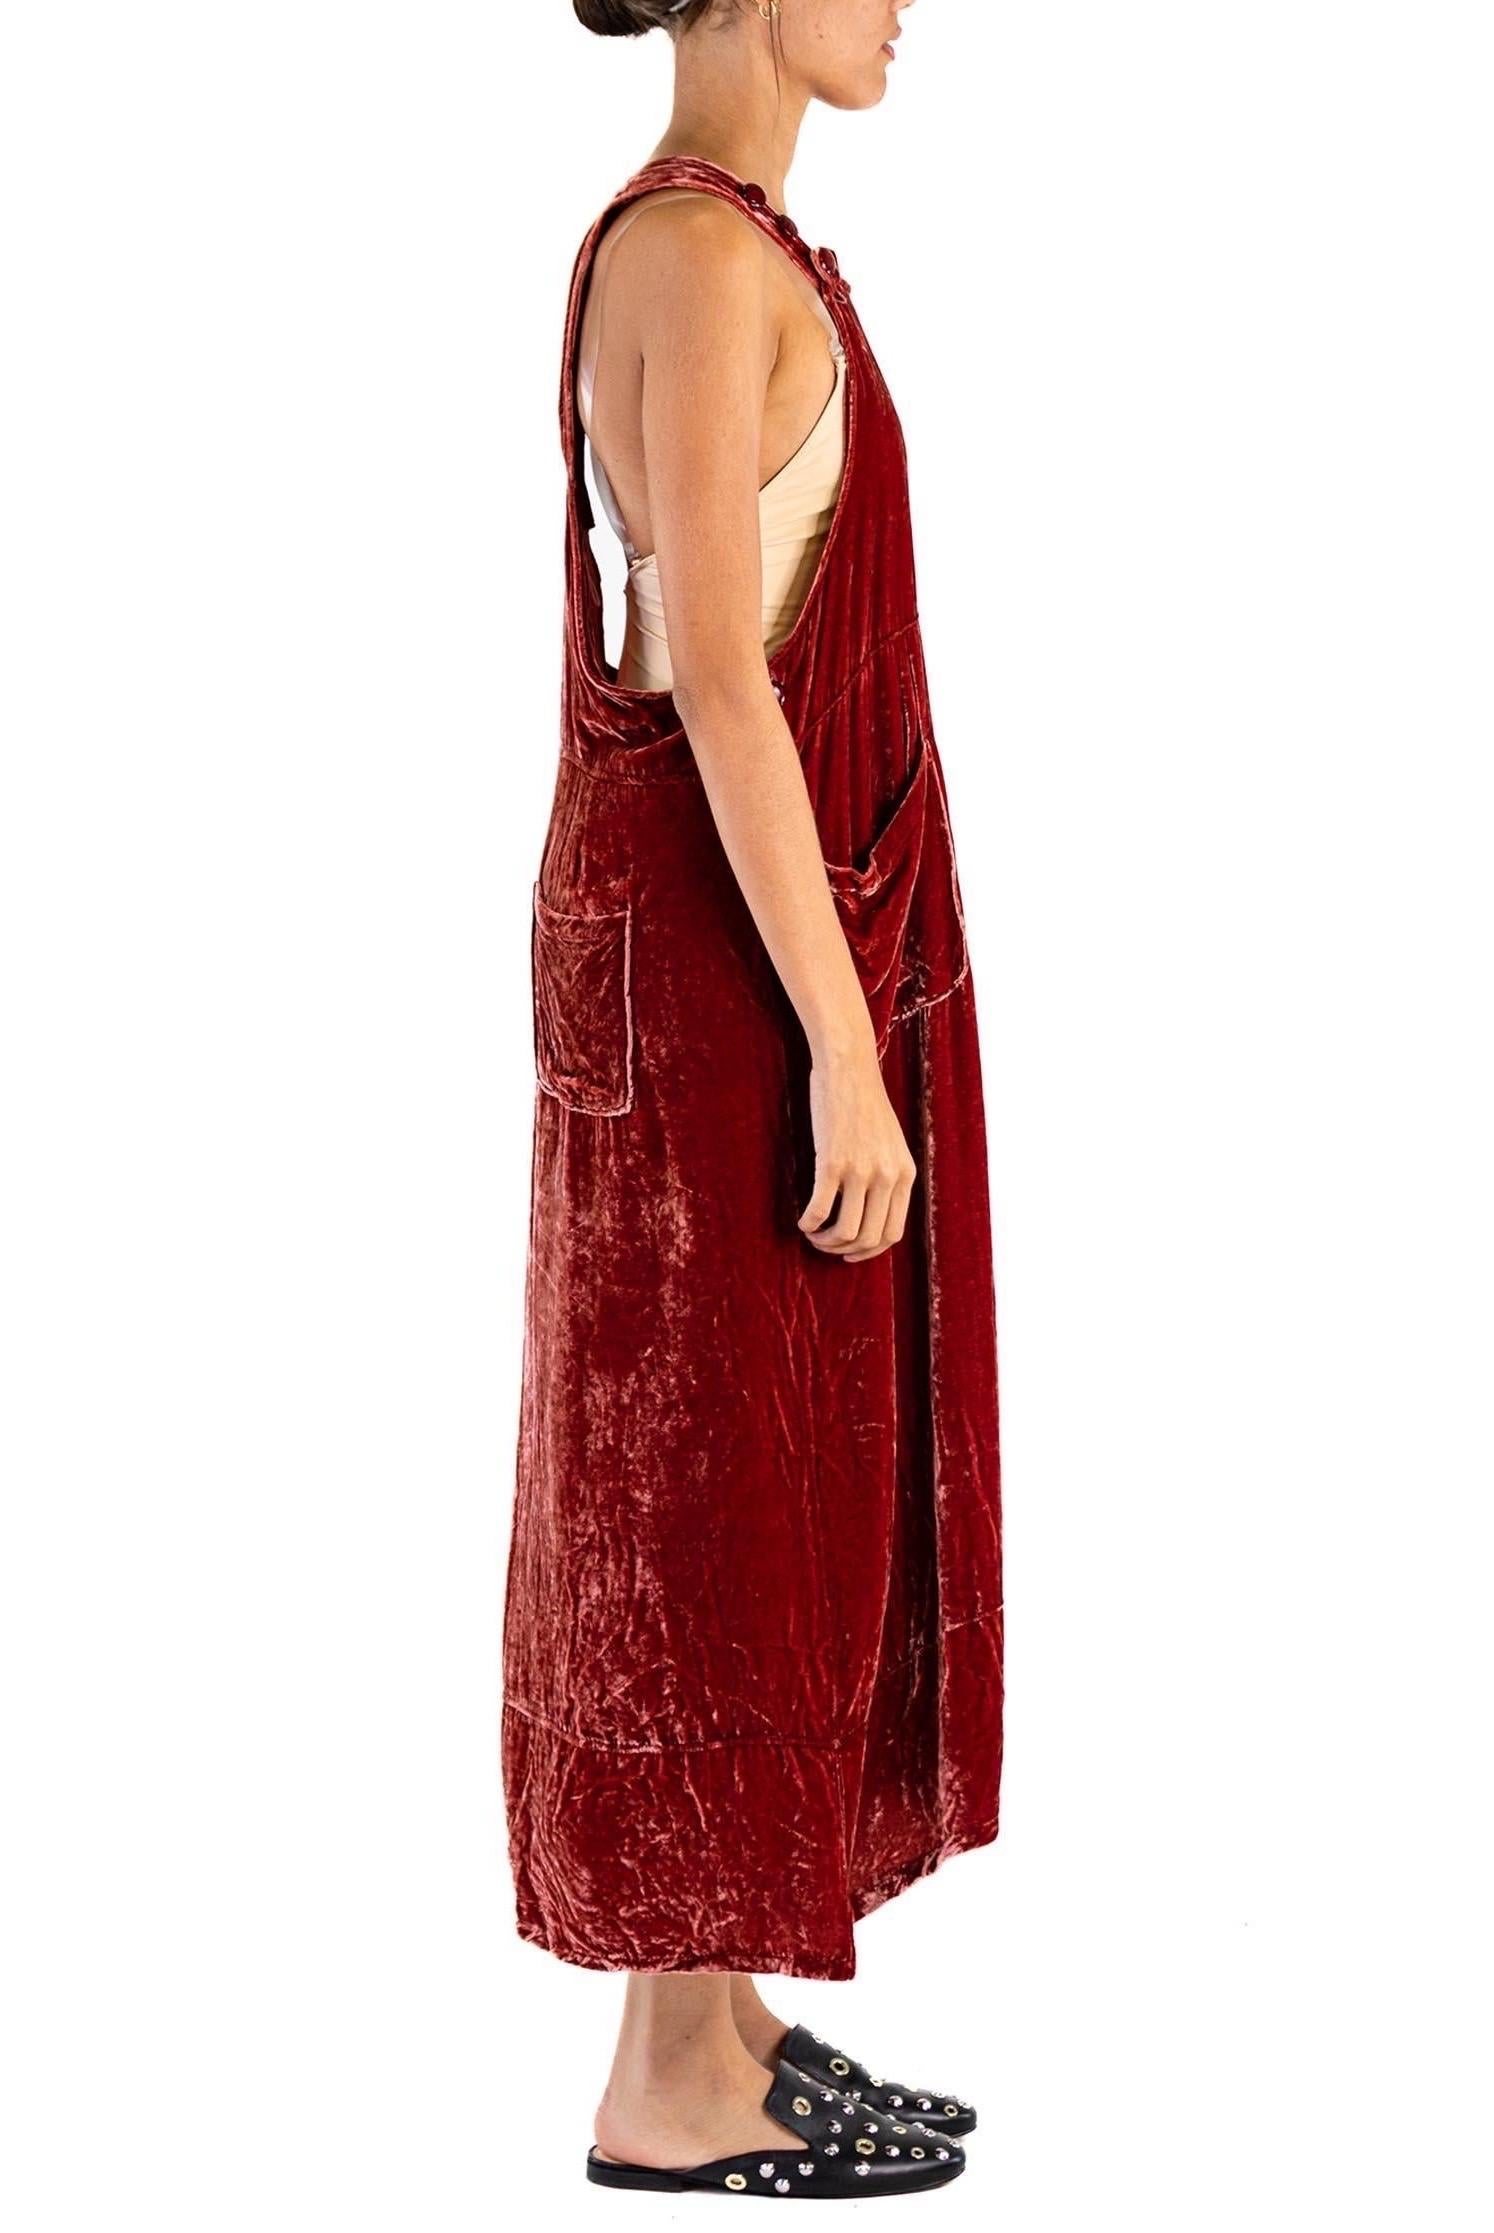 Women's 1990S Dusty Rose Silk & Rayon Crushed Velvet Overalls Style Dress With Large Bu For Sale